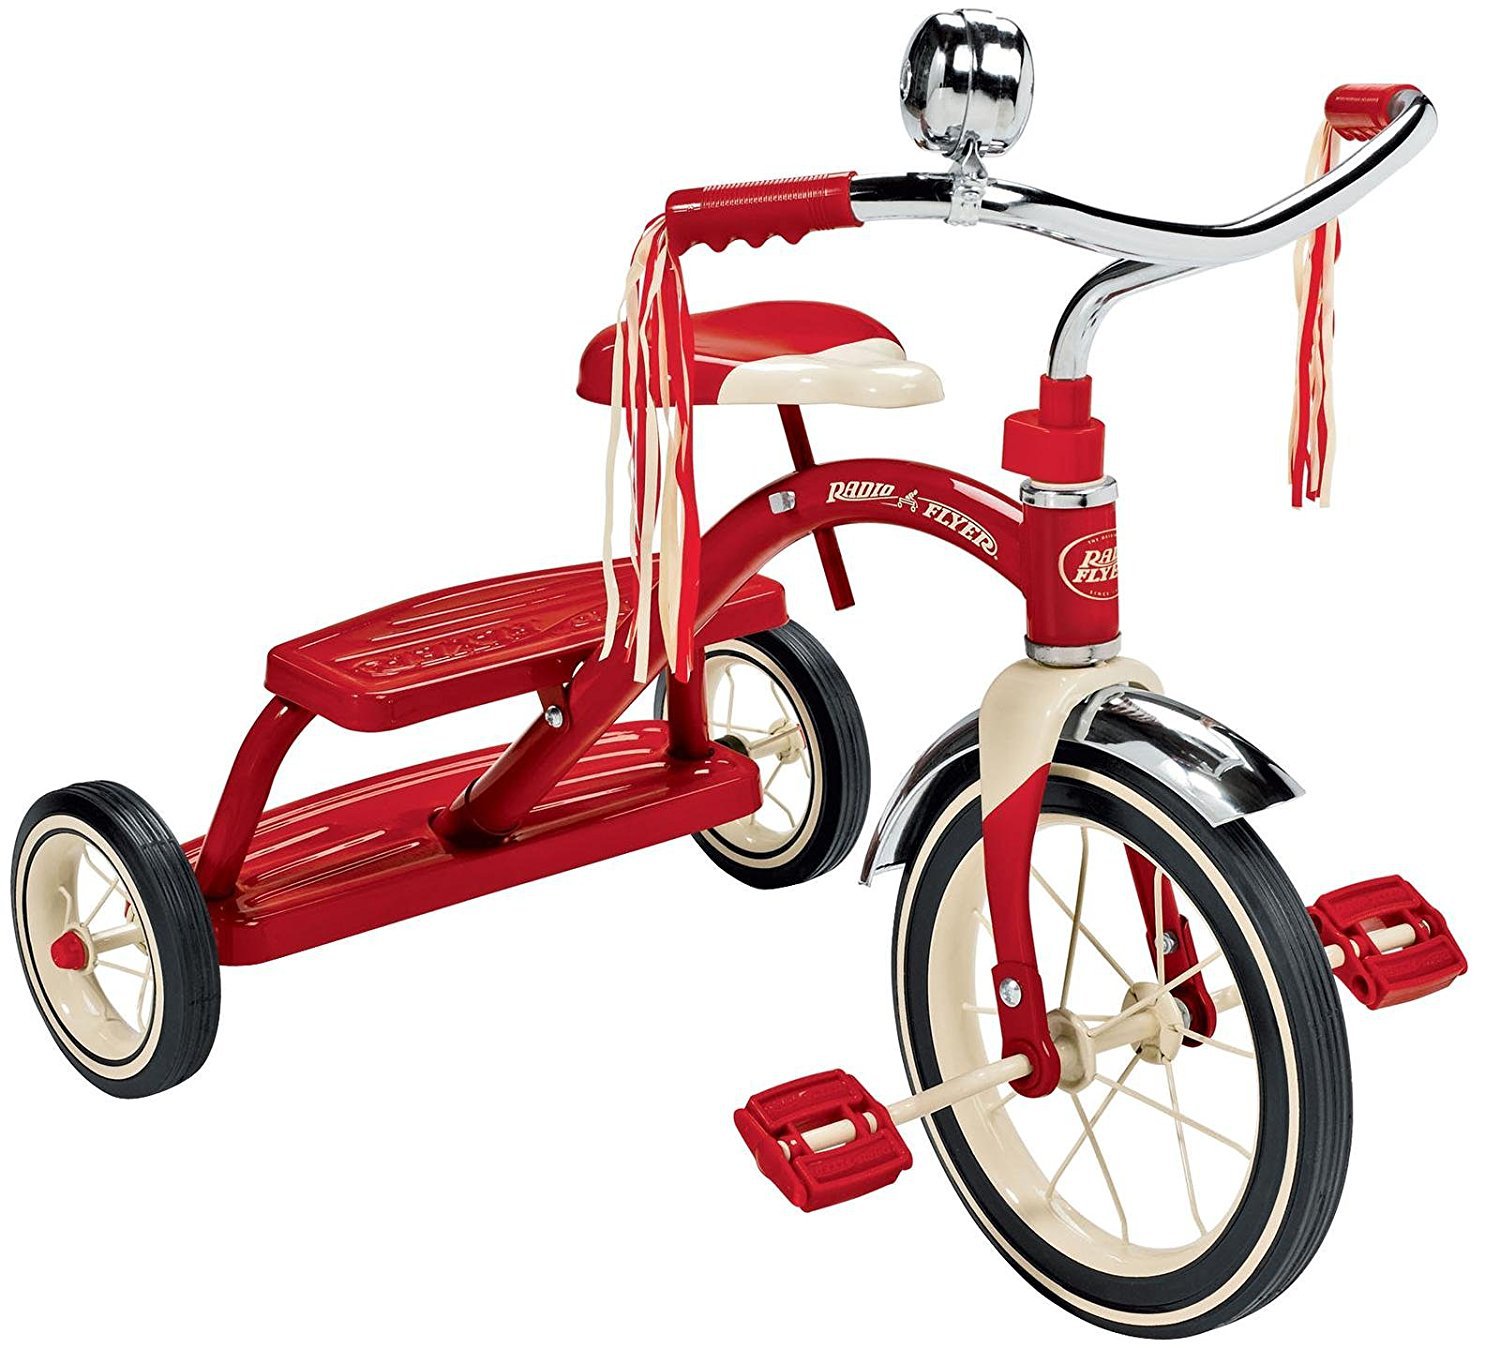 Best Tricycle For 2 Year Old - Bikes For All